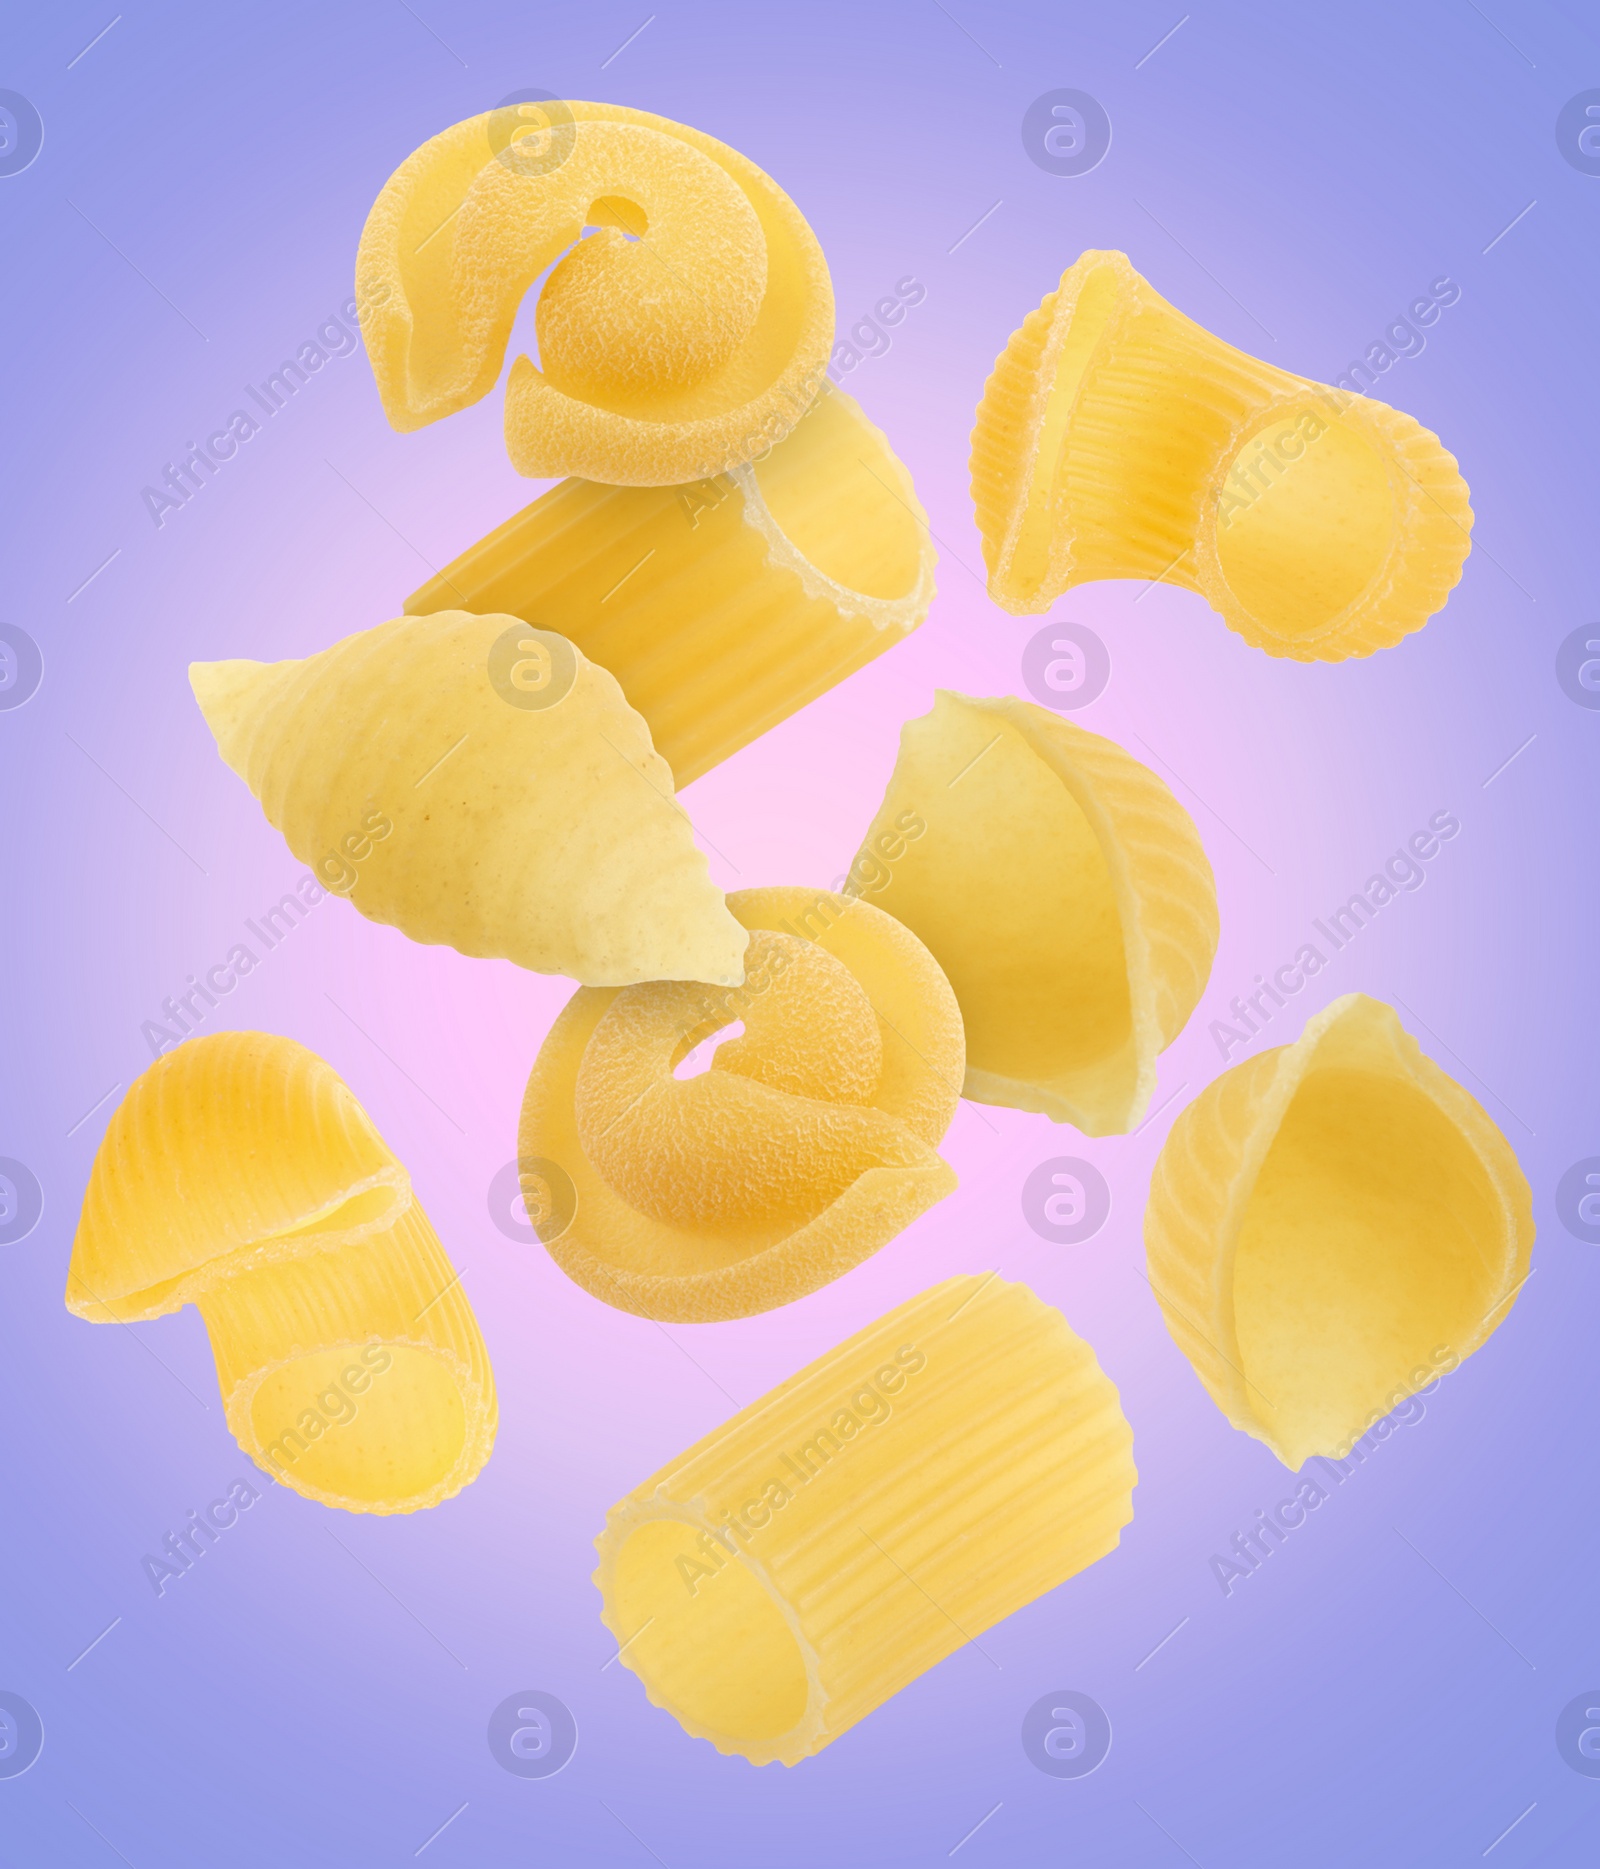 Image of Different types of pasta flying on color background